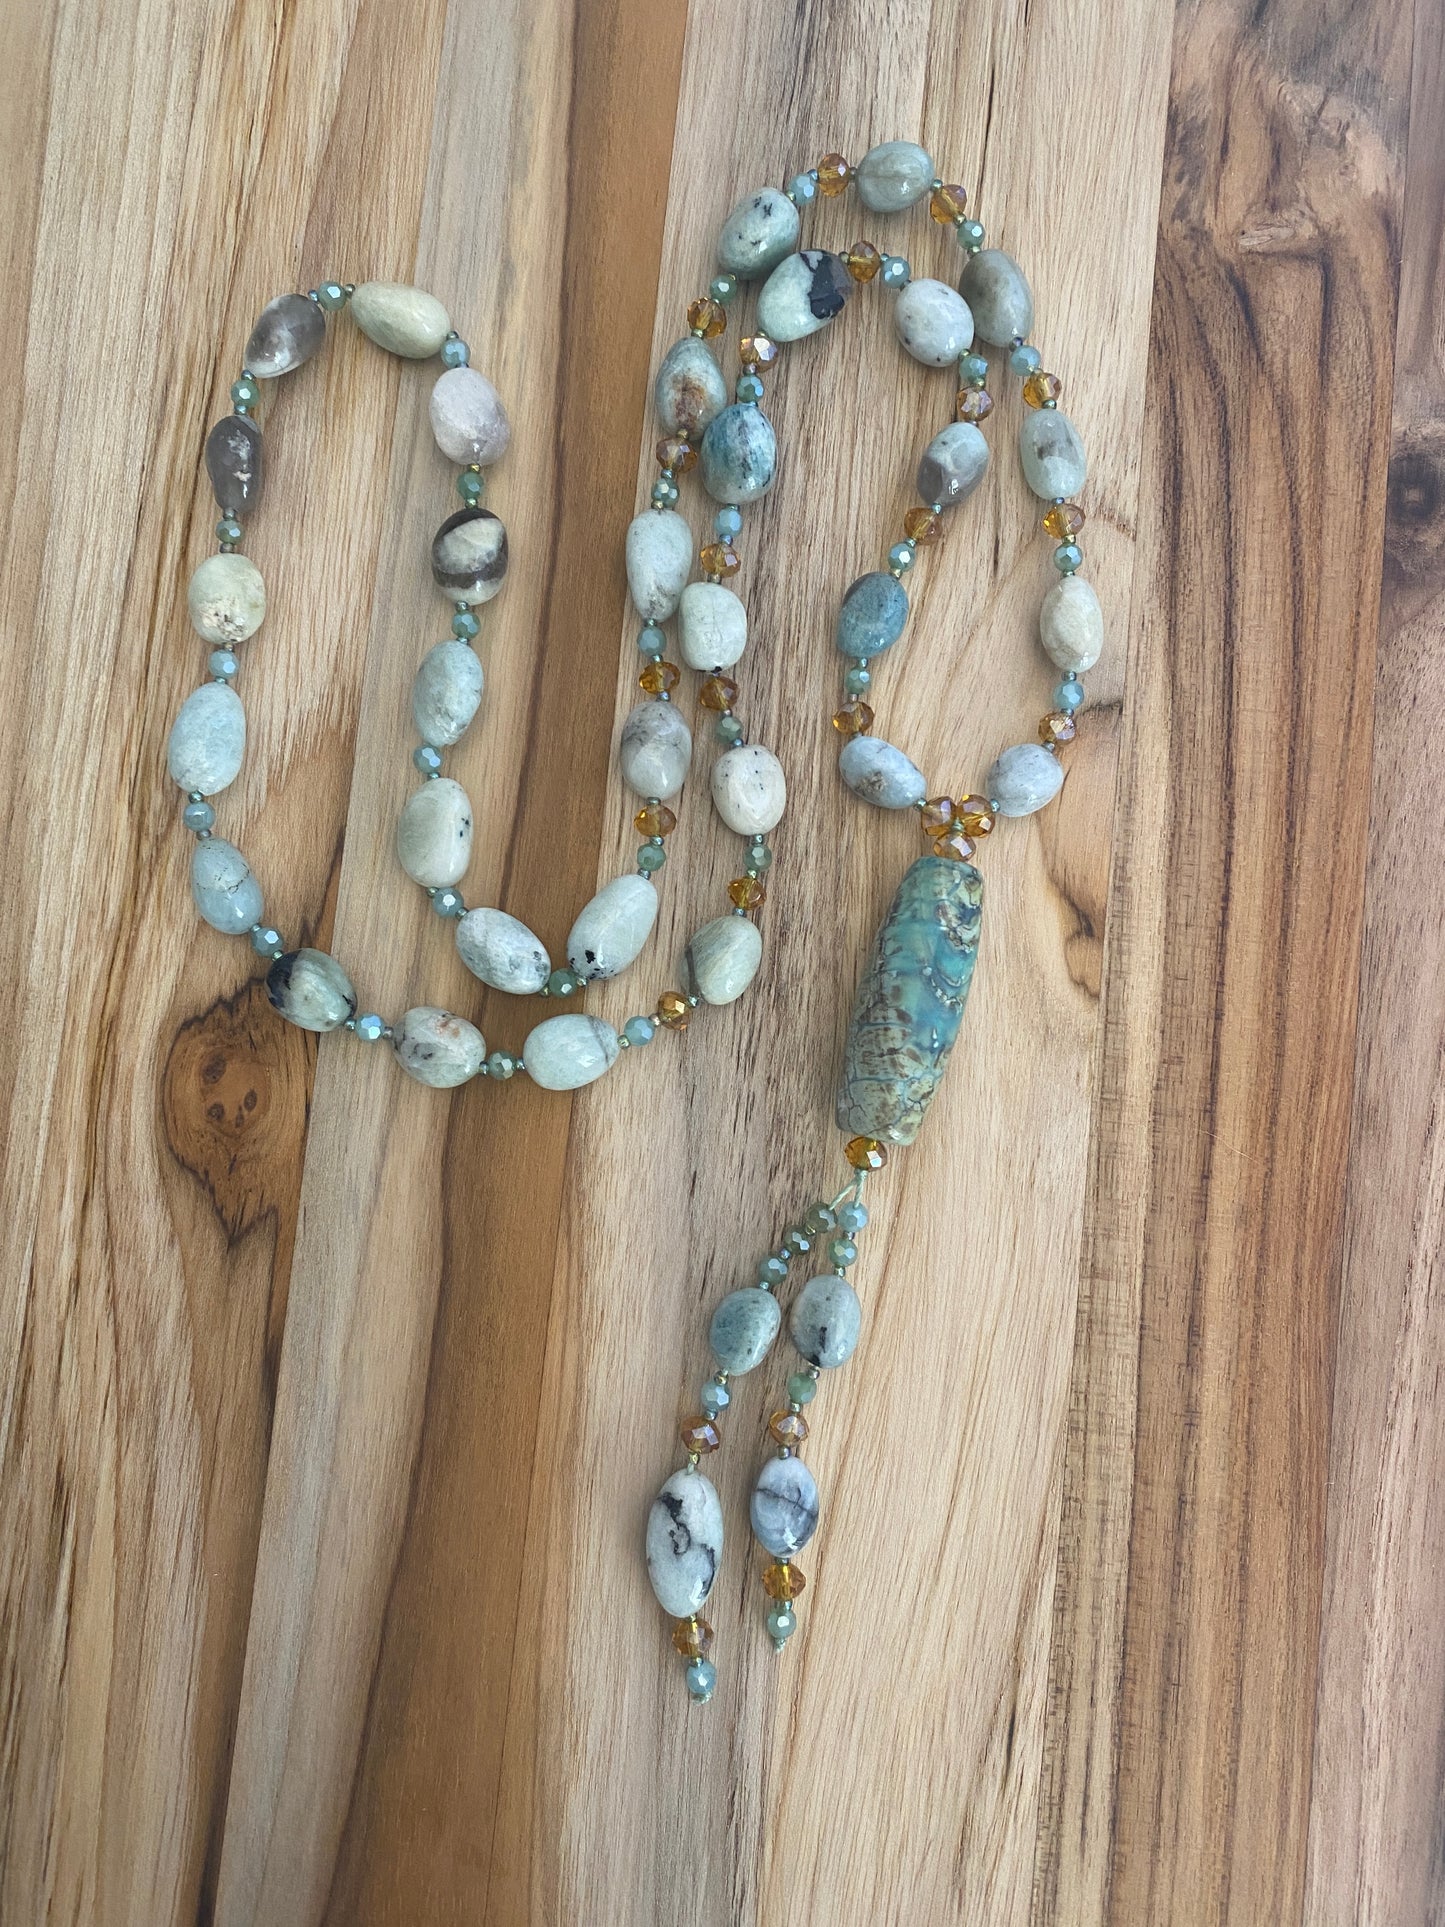 30" Long Amazonite Beaded Necklace with Agate Focal